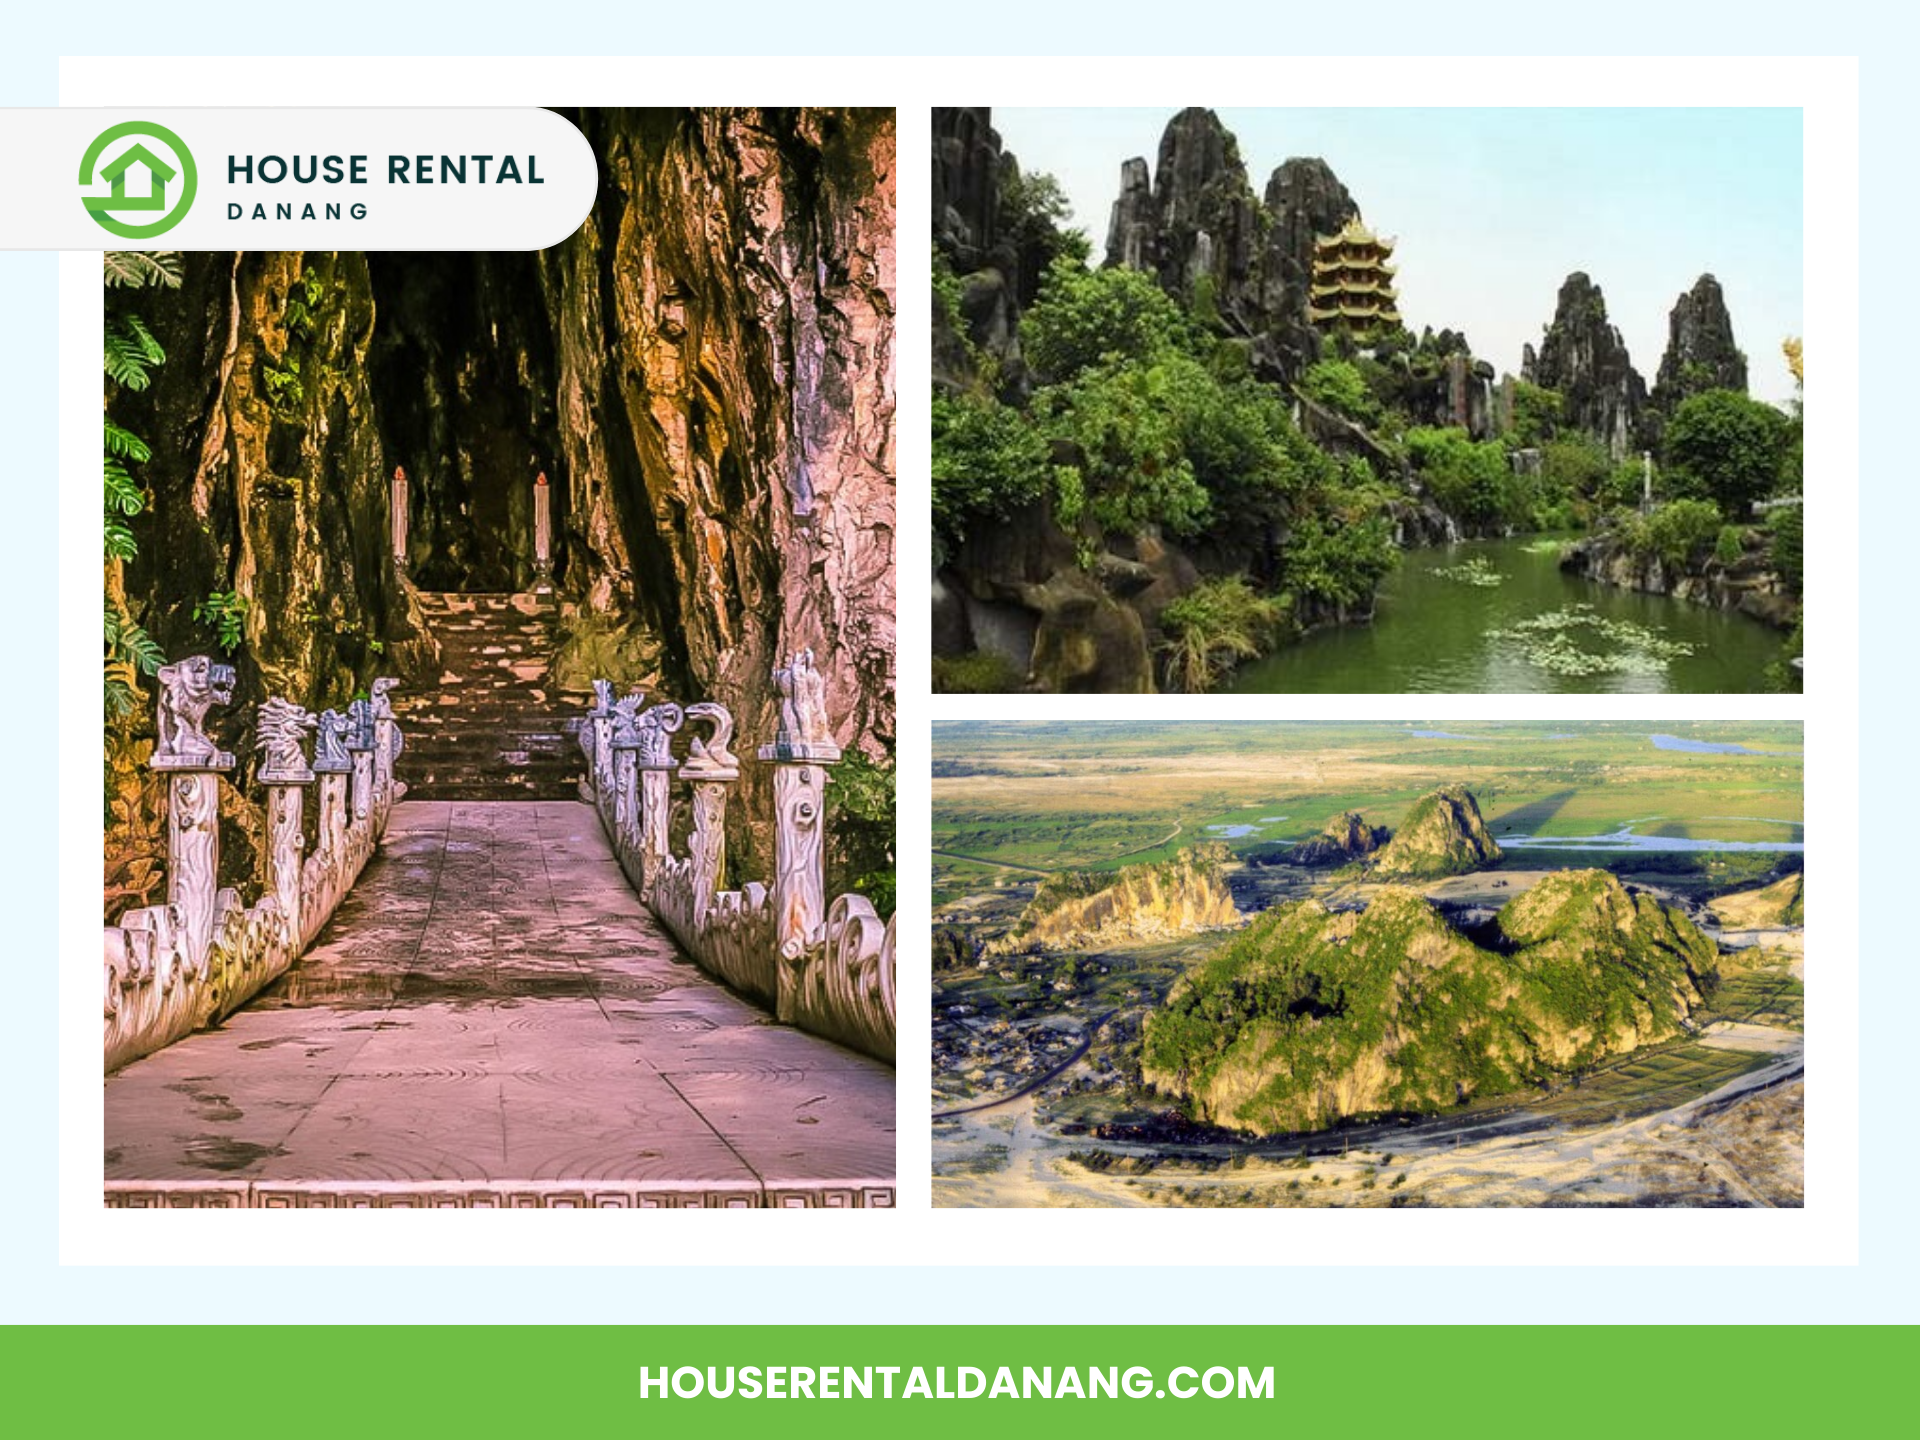 Promotional image showcasing the Marble Mountains Danang: a stone walkway inside a cave, a temple amidst rocky greenery, and an aerial view of a stunning geological landscape. Text reads "House Rental Danang, houserentaldanang.com.